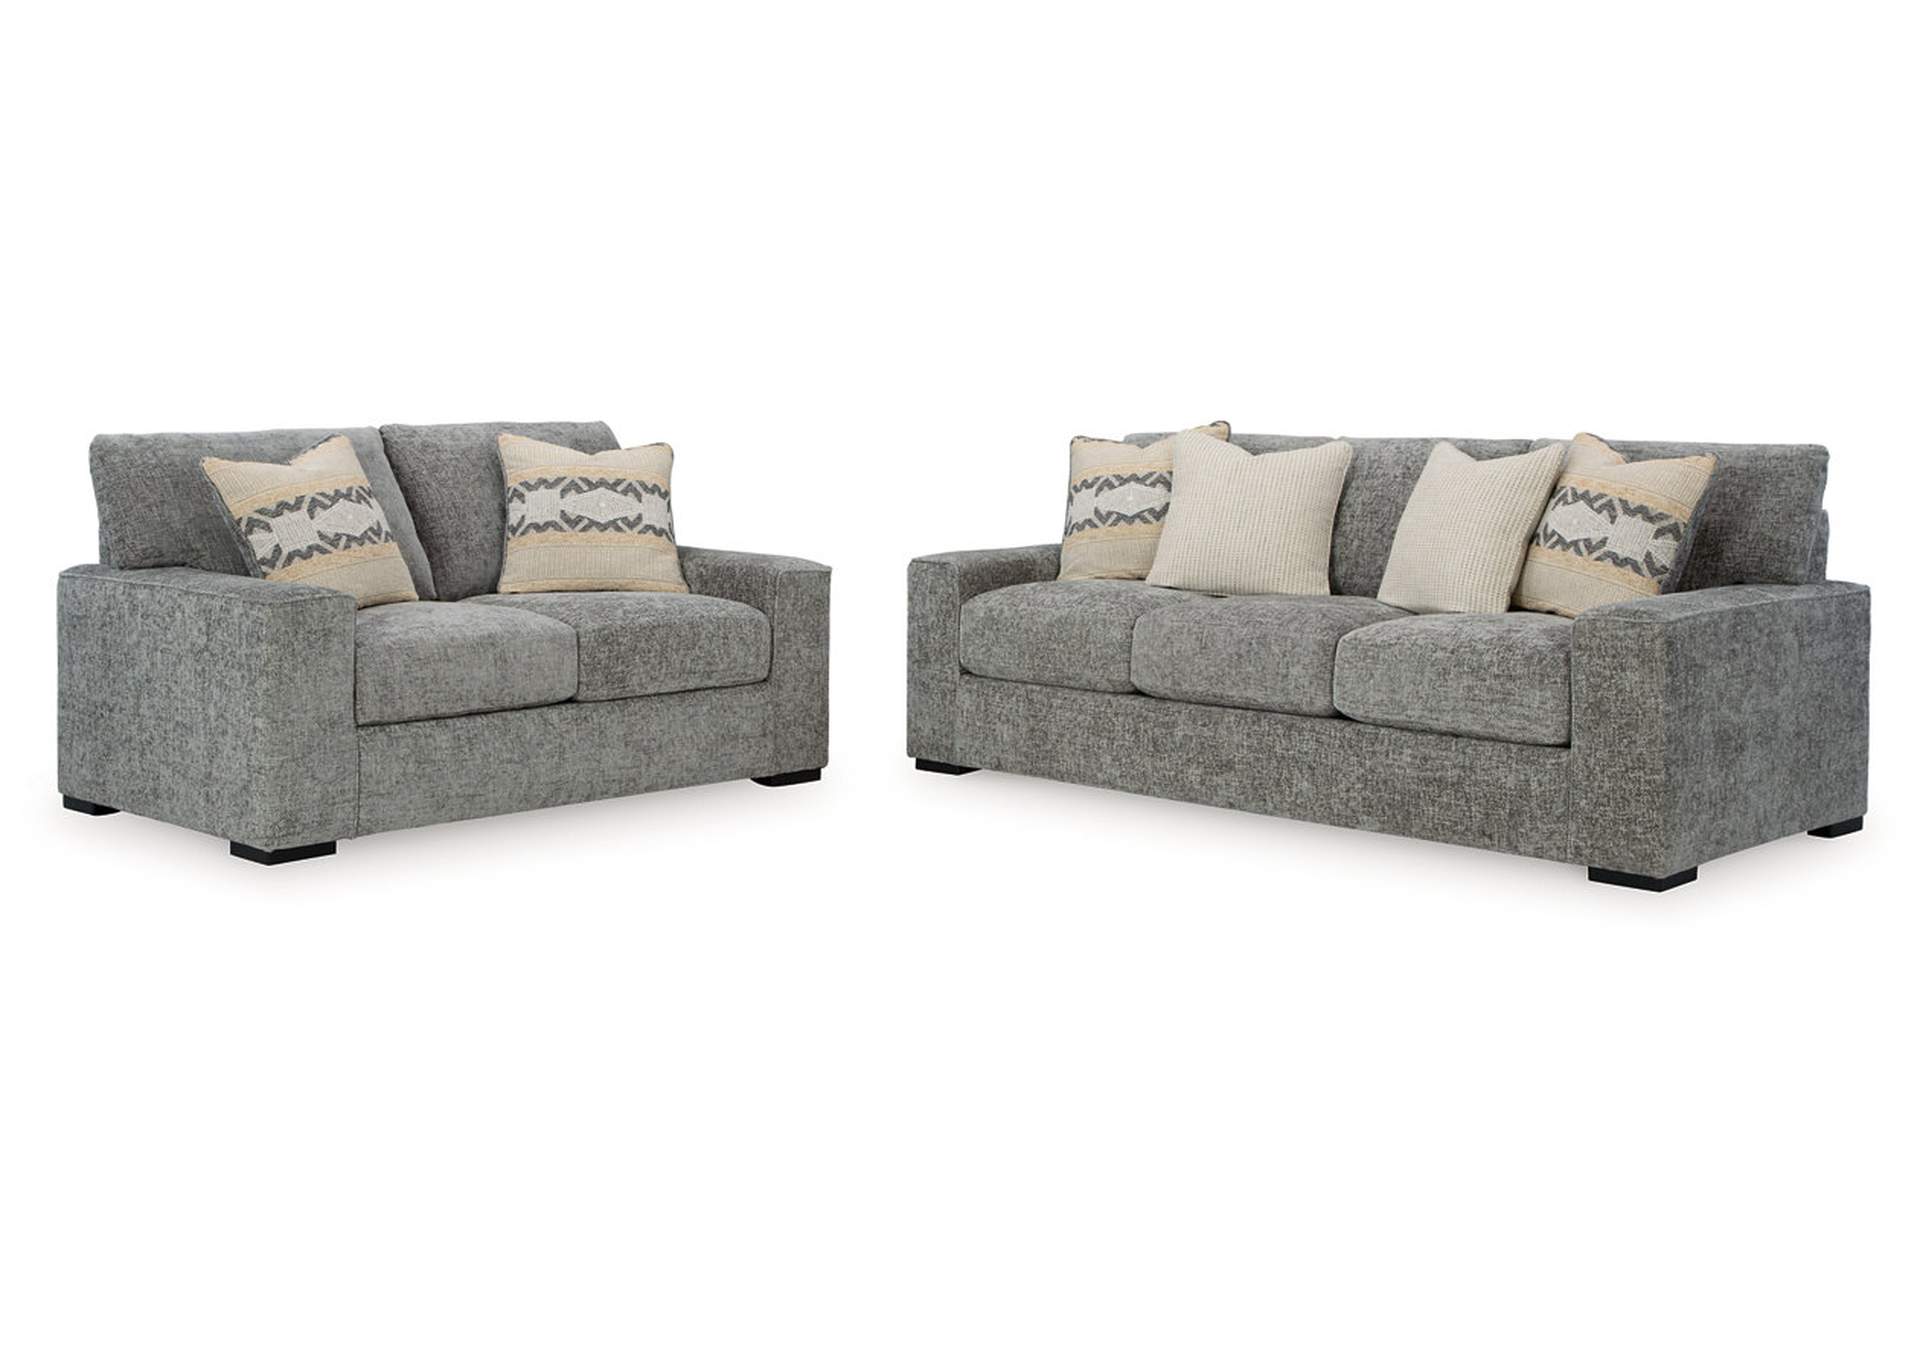 Dunmor Sofa and Loveseat,Signature Design By Ashley